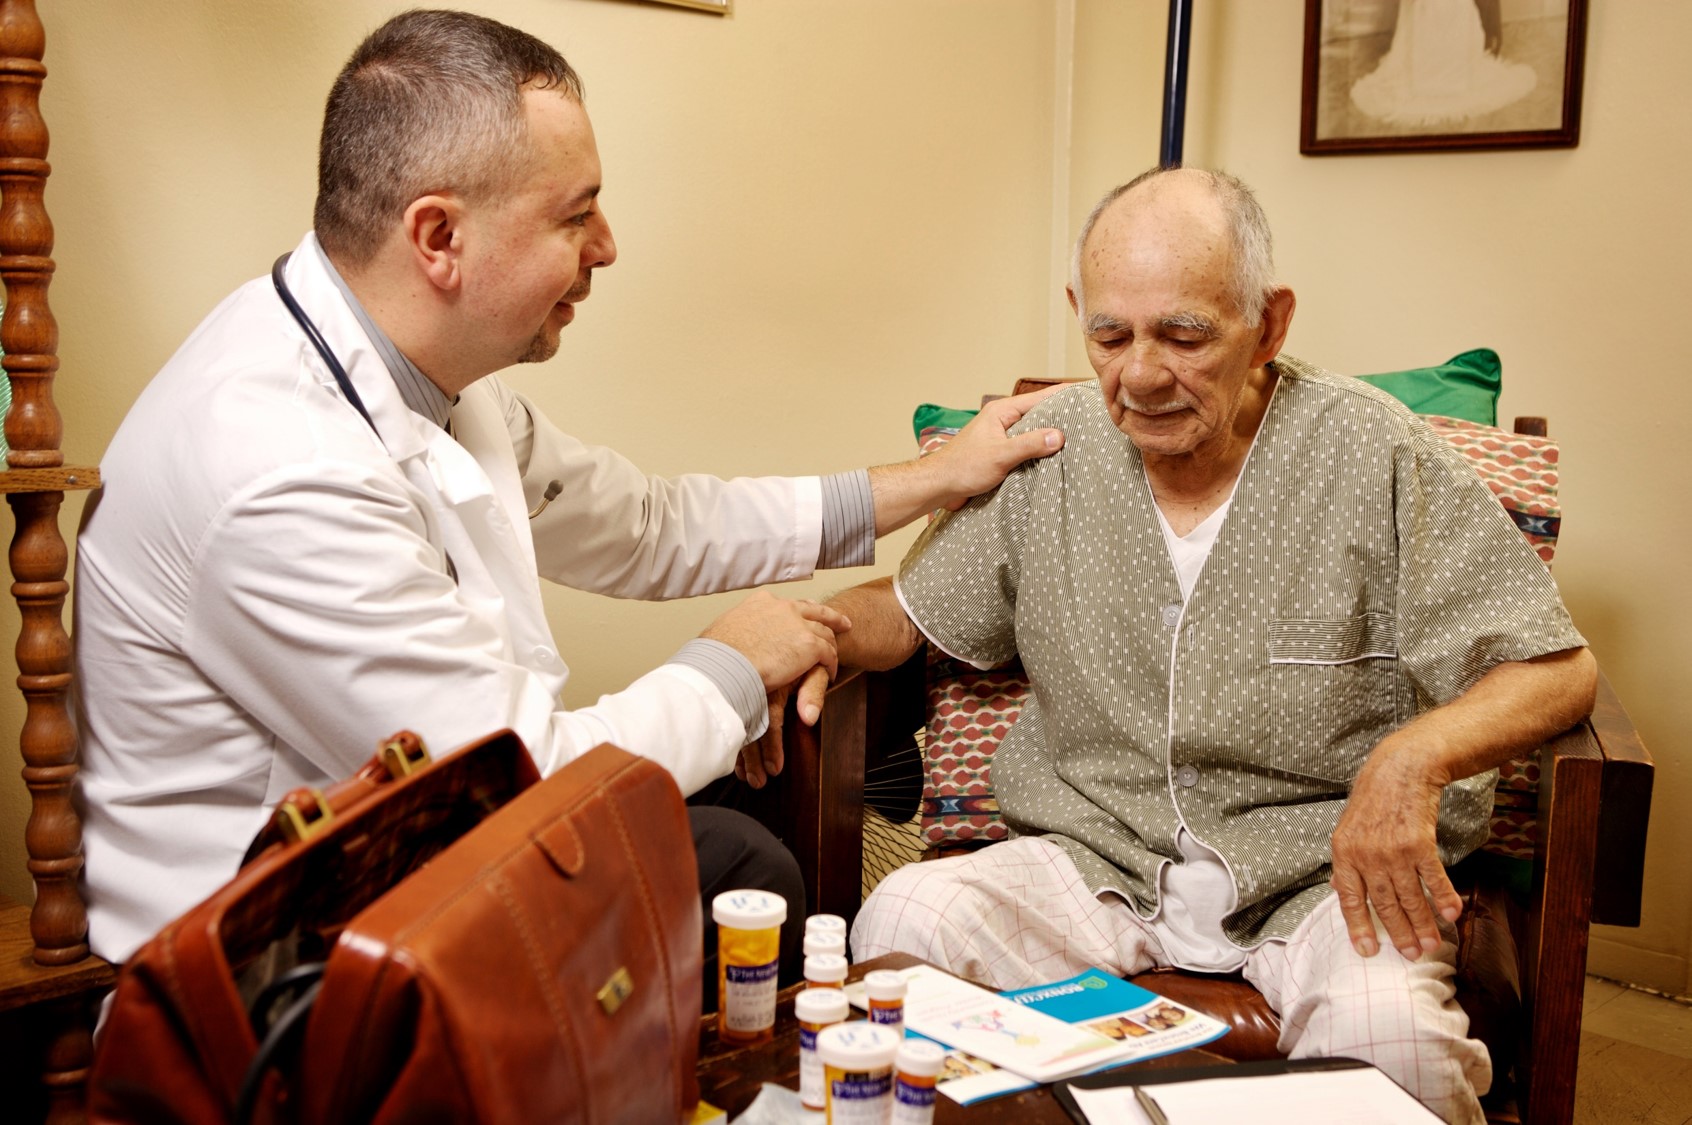 A doctor in a white coat sits next to an elderly patient in his living room, placing one hand kindly on his shoulder and the other on the patient's hand. Prescription bottles are scattered on the coffee table in front of them.